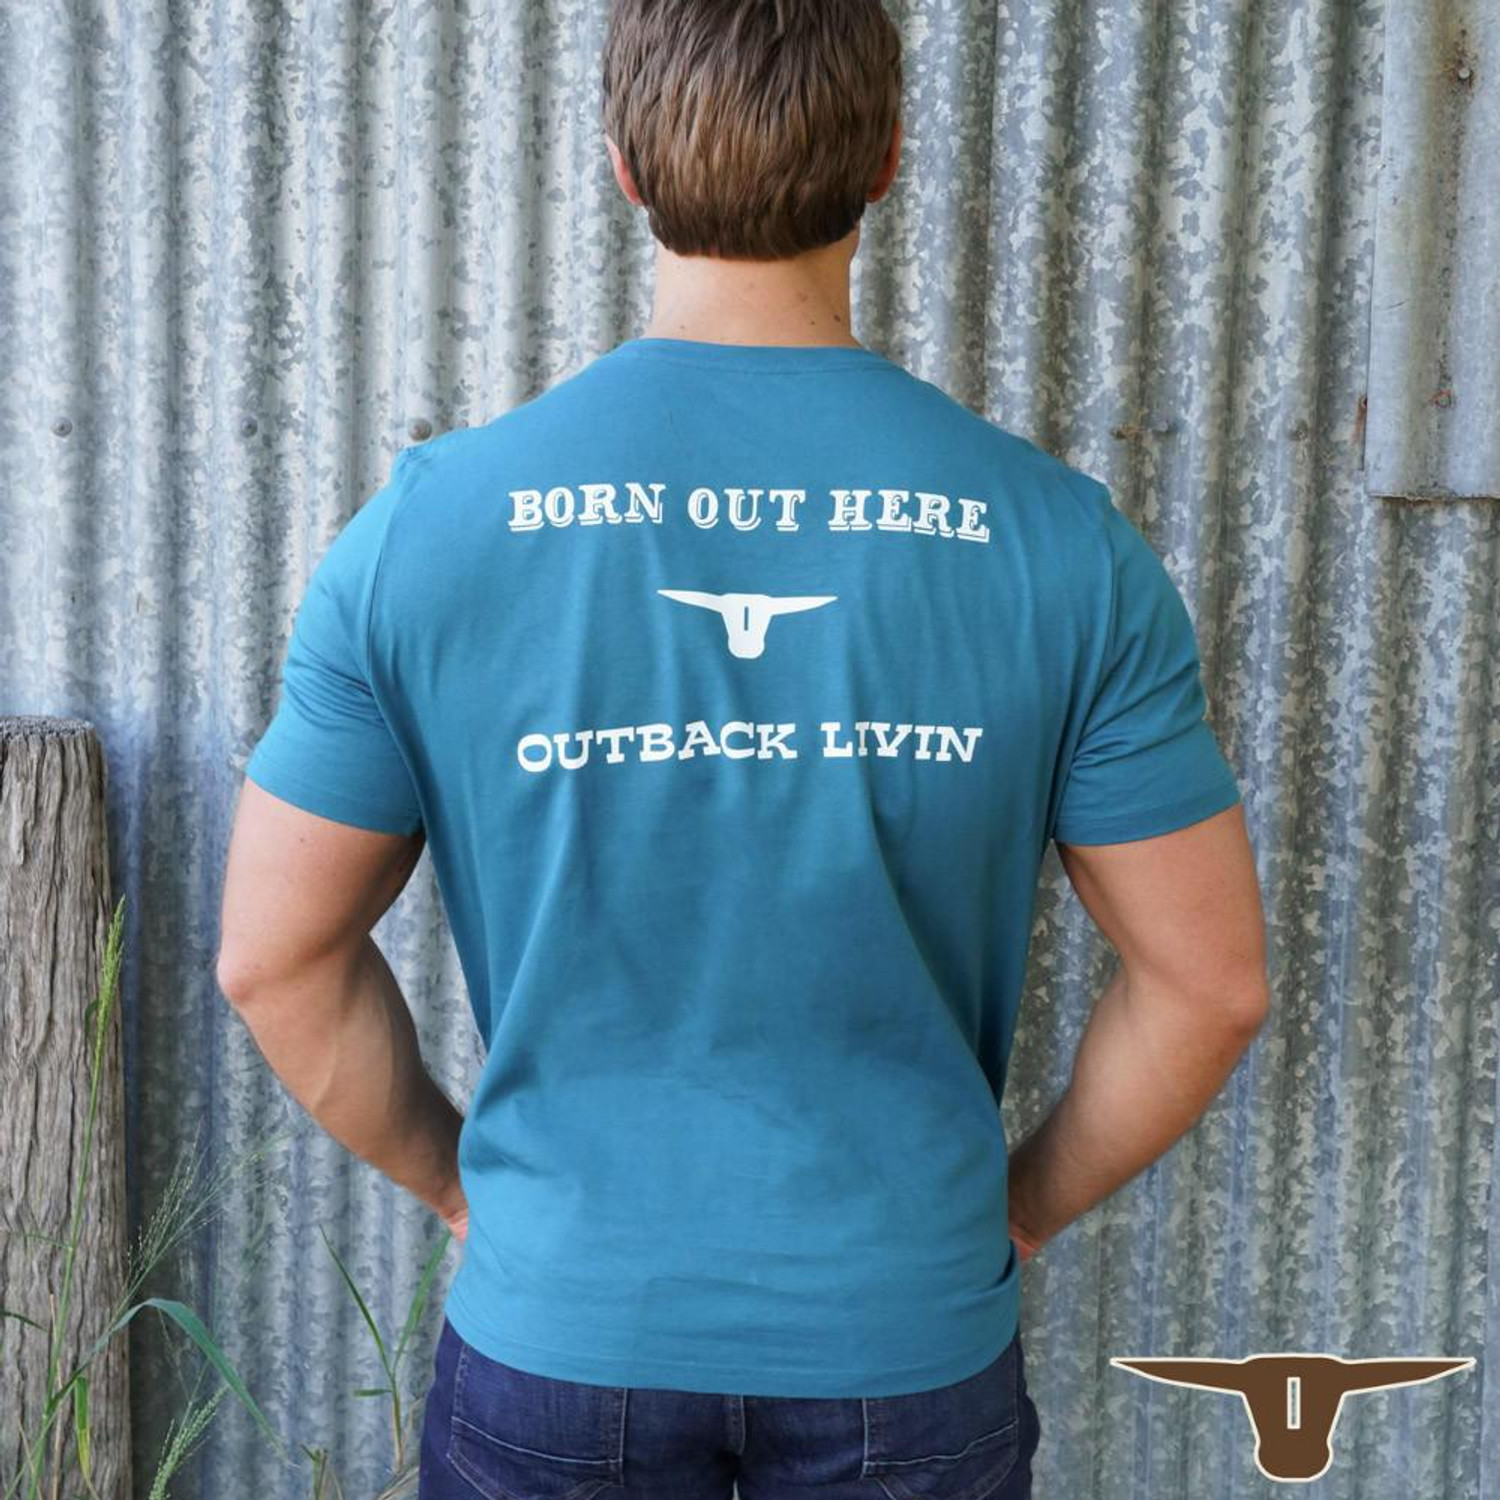  Born Out Here BMPT3 Verandah T-Shirt in Petrol (Buy 4 or more for $39.95 each) 